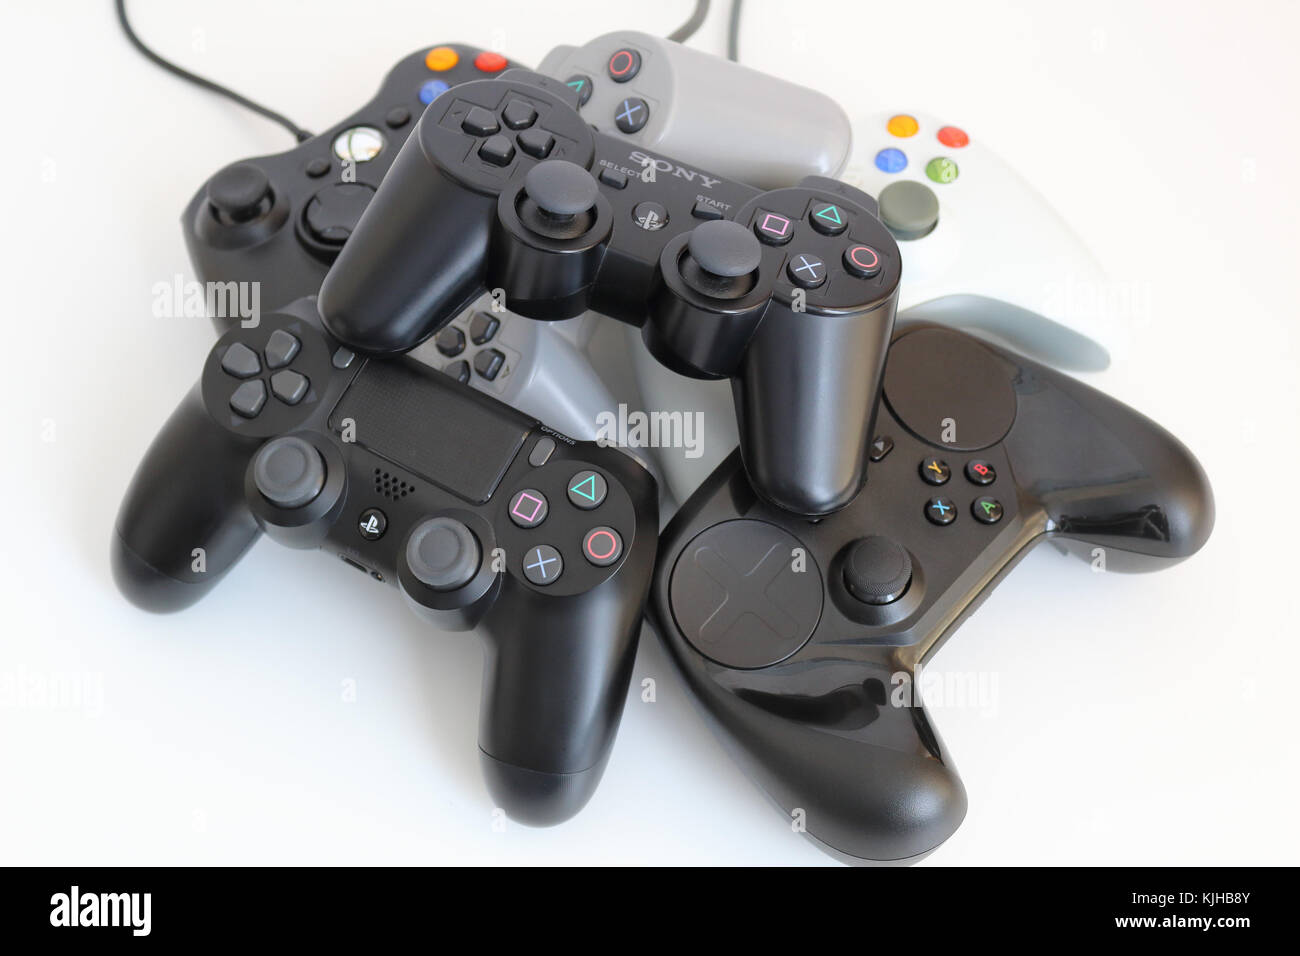 Various computer game controllers, arranged in a pile on a white background. Stock Photo